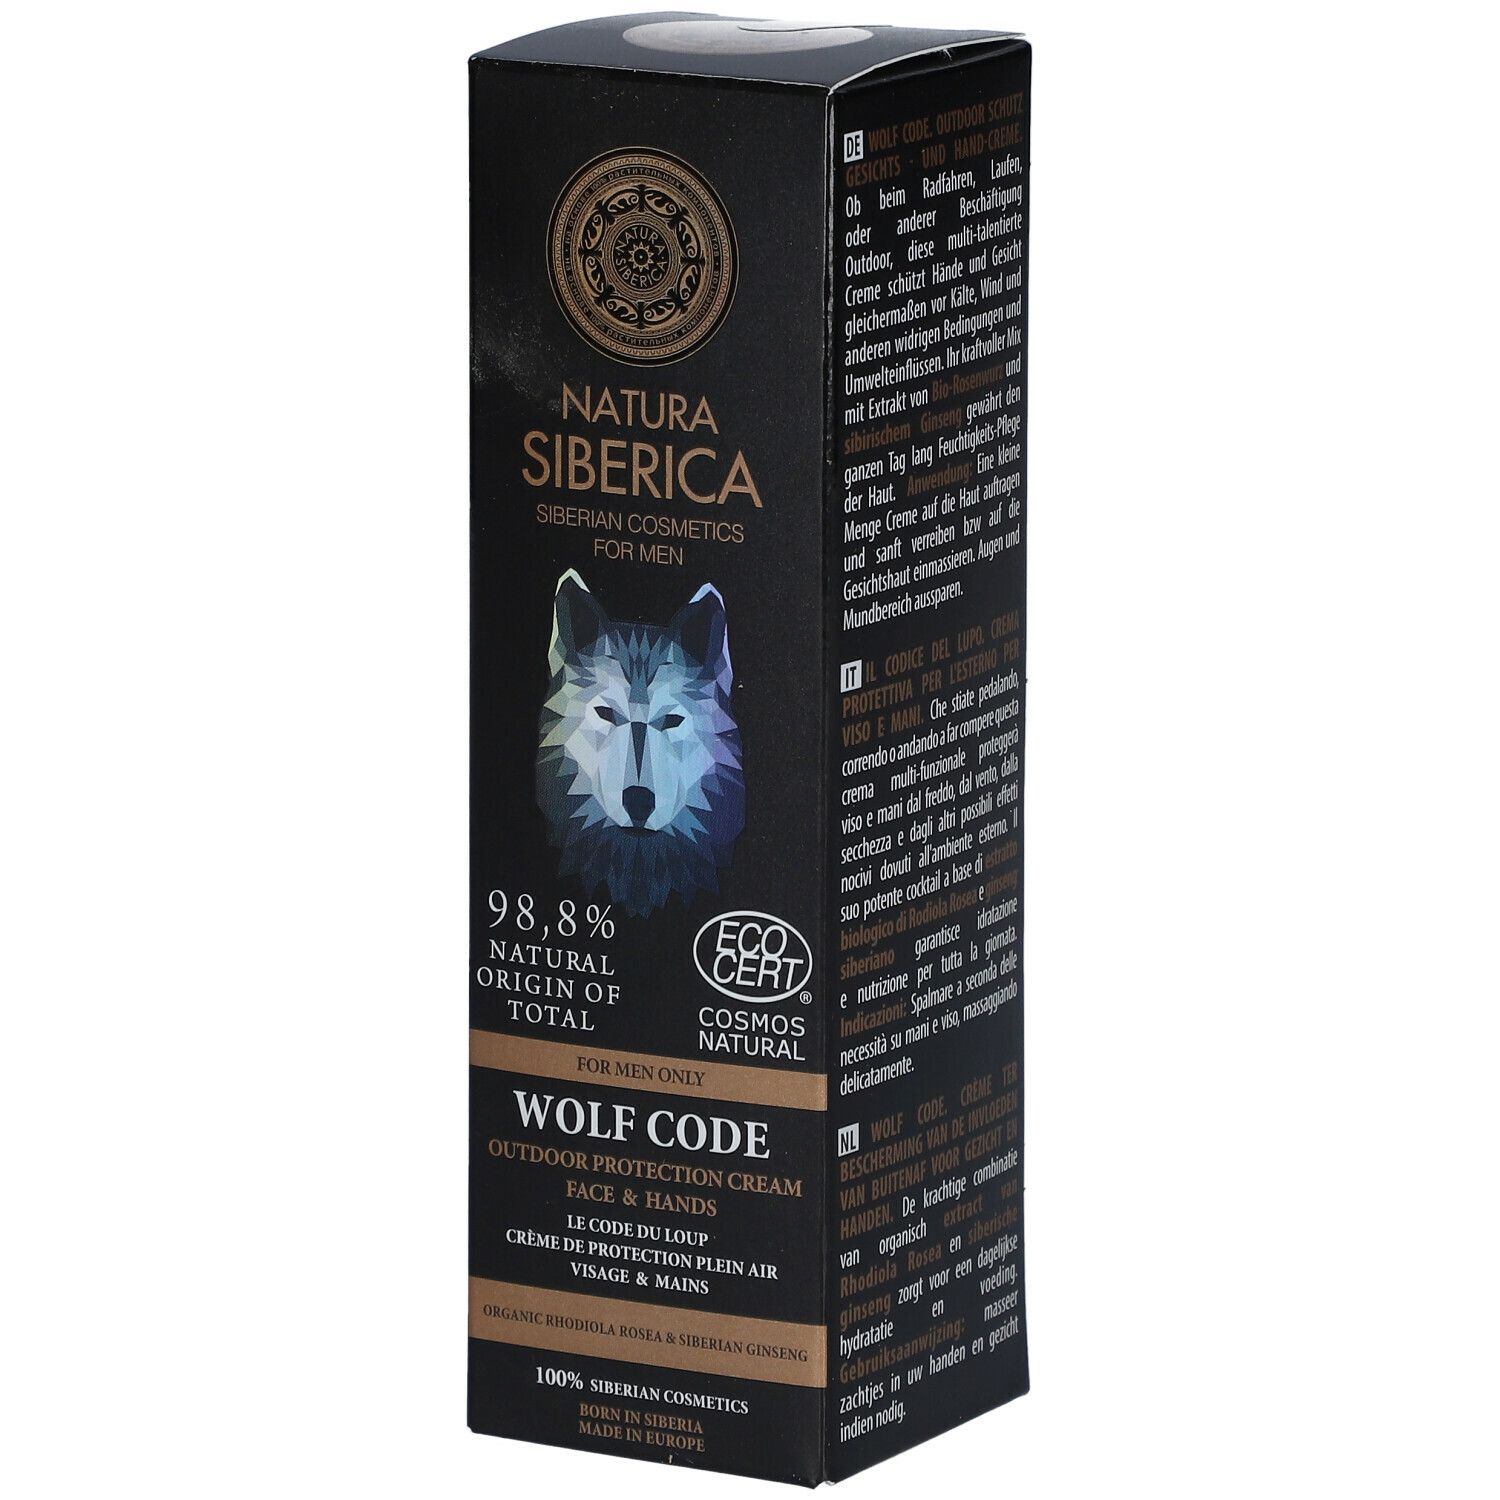 Natura Siberica Wolf code Outdoor protection cream for face & hands